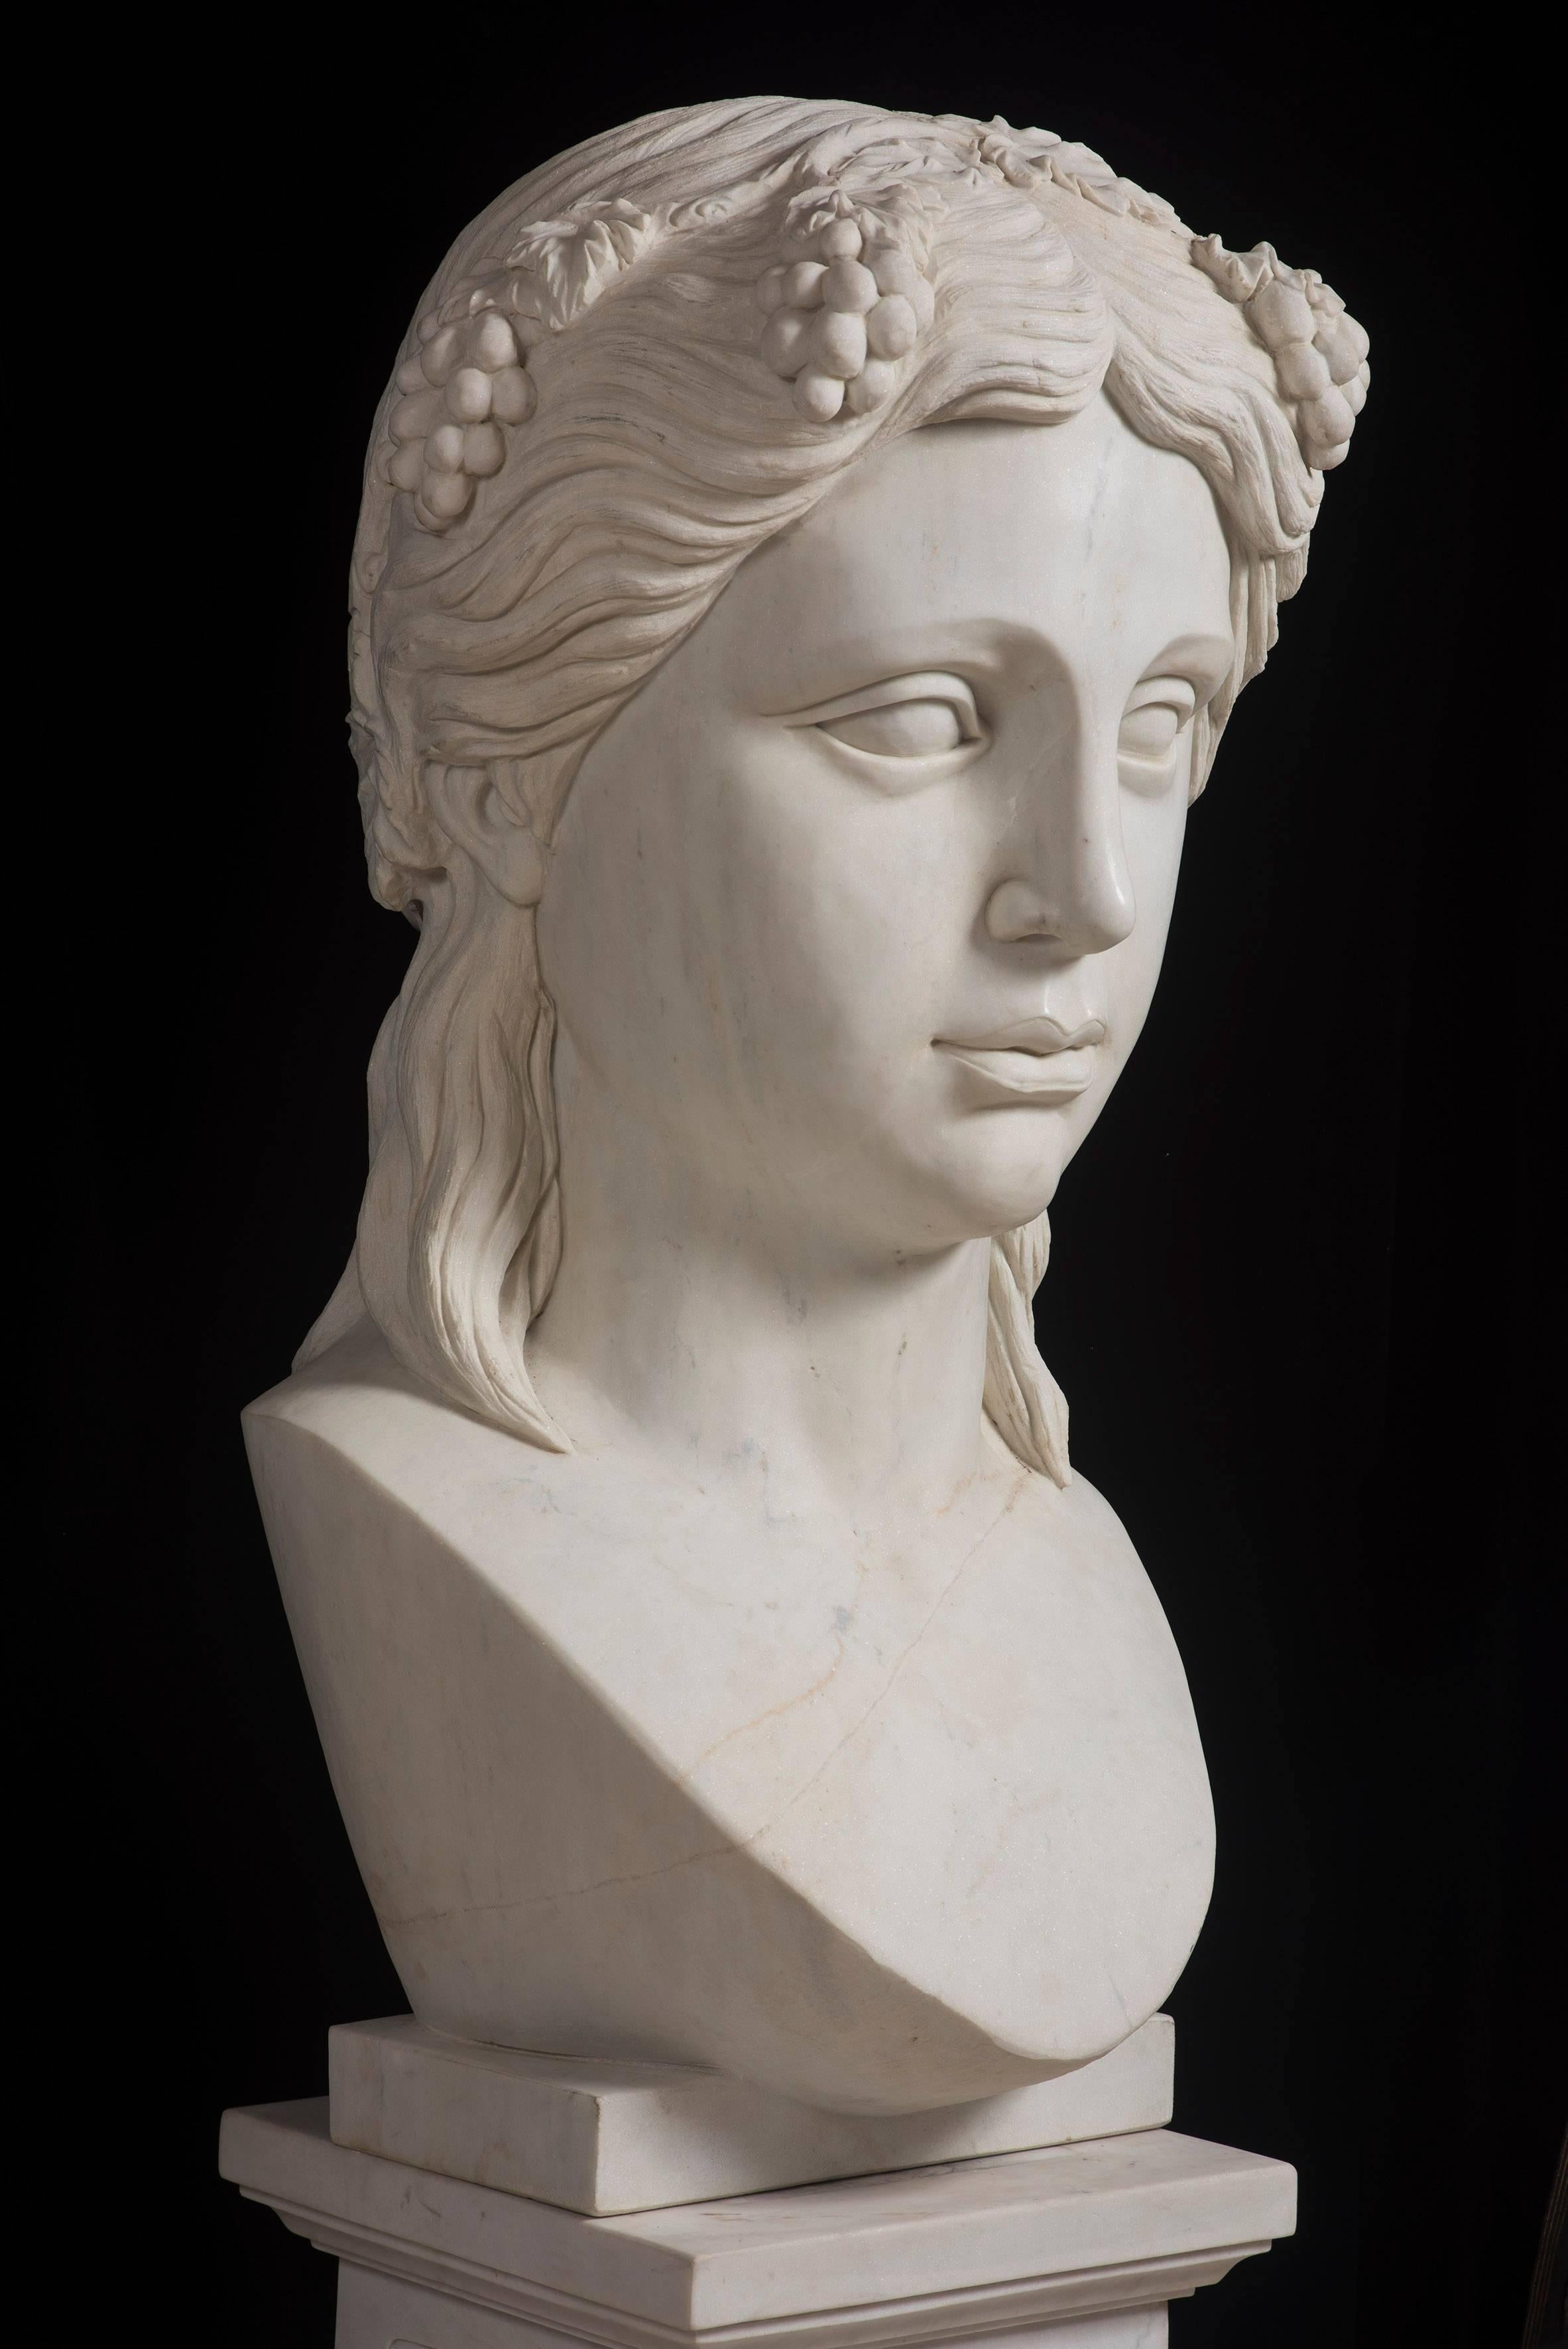 Colossal Marble head of Demeter, mother of Phersephone, was in the ancient Greek mythology the goddess of harvest and agriculture that take care about the earth and fertility. She preserve also the cycle of the life. Carved by the Sculptor artist